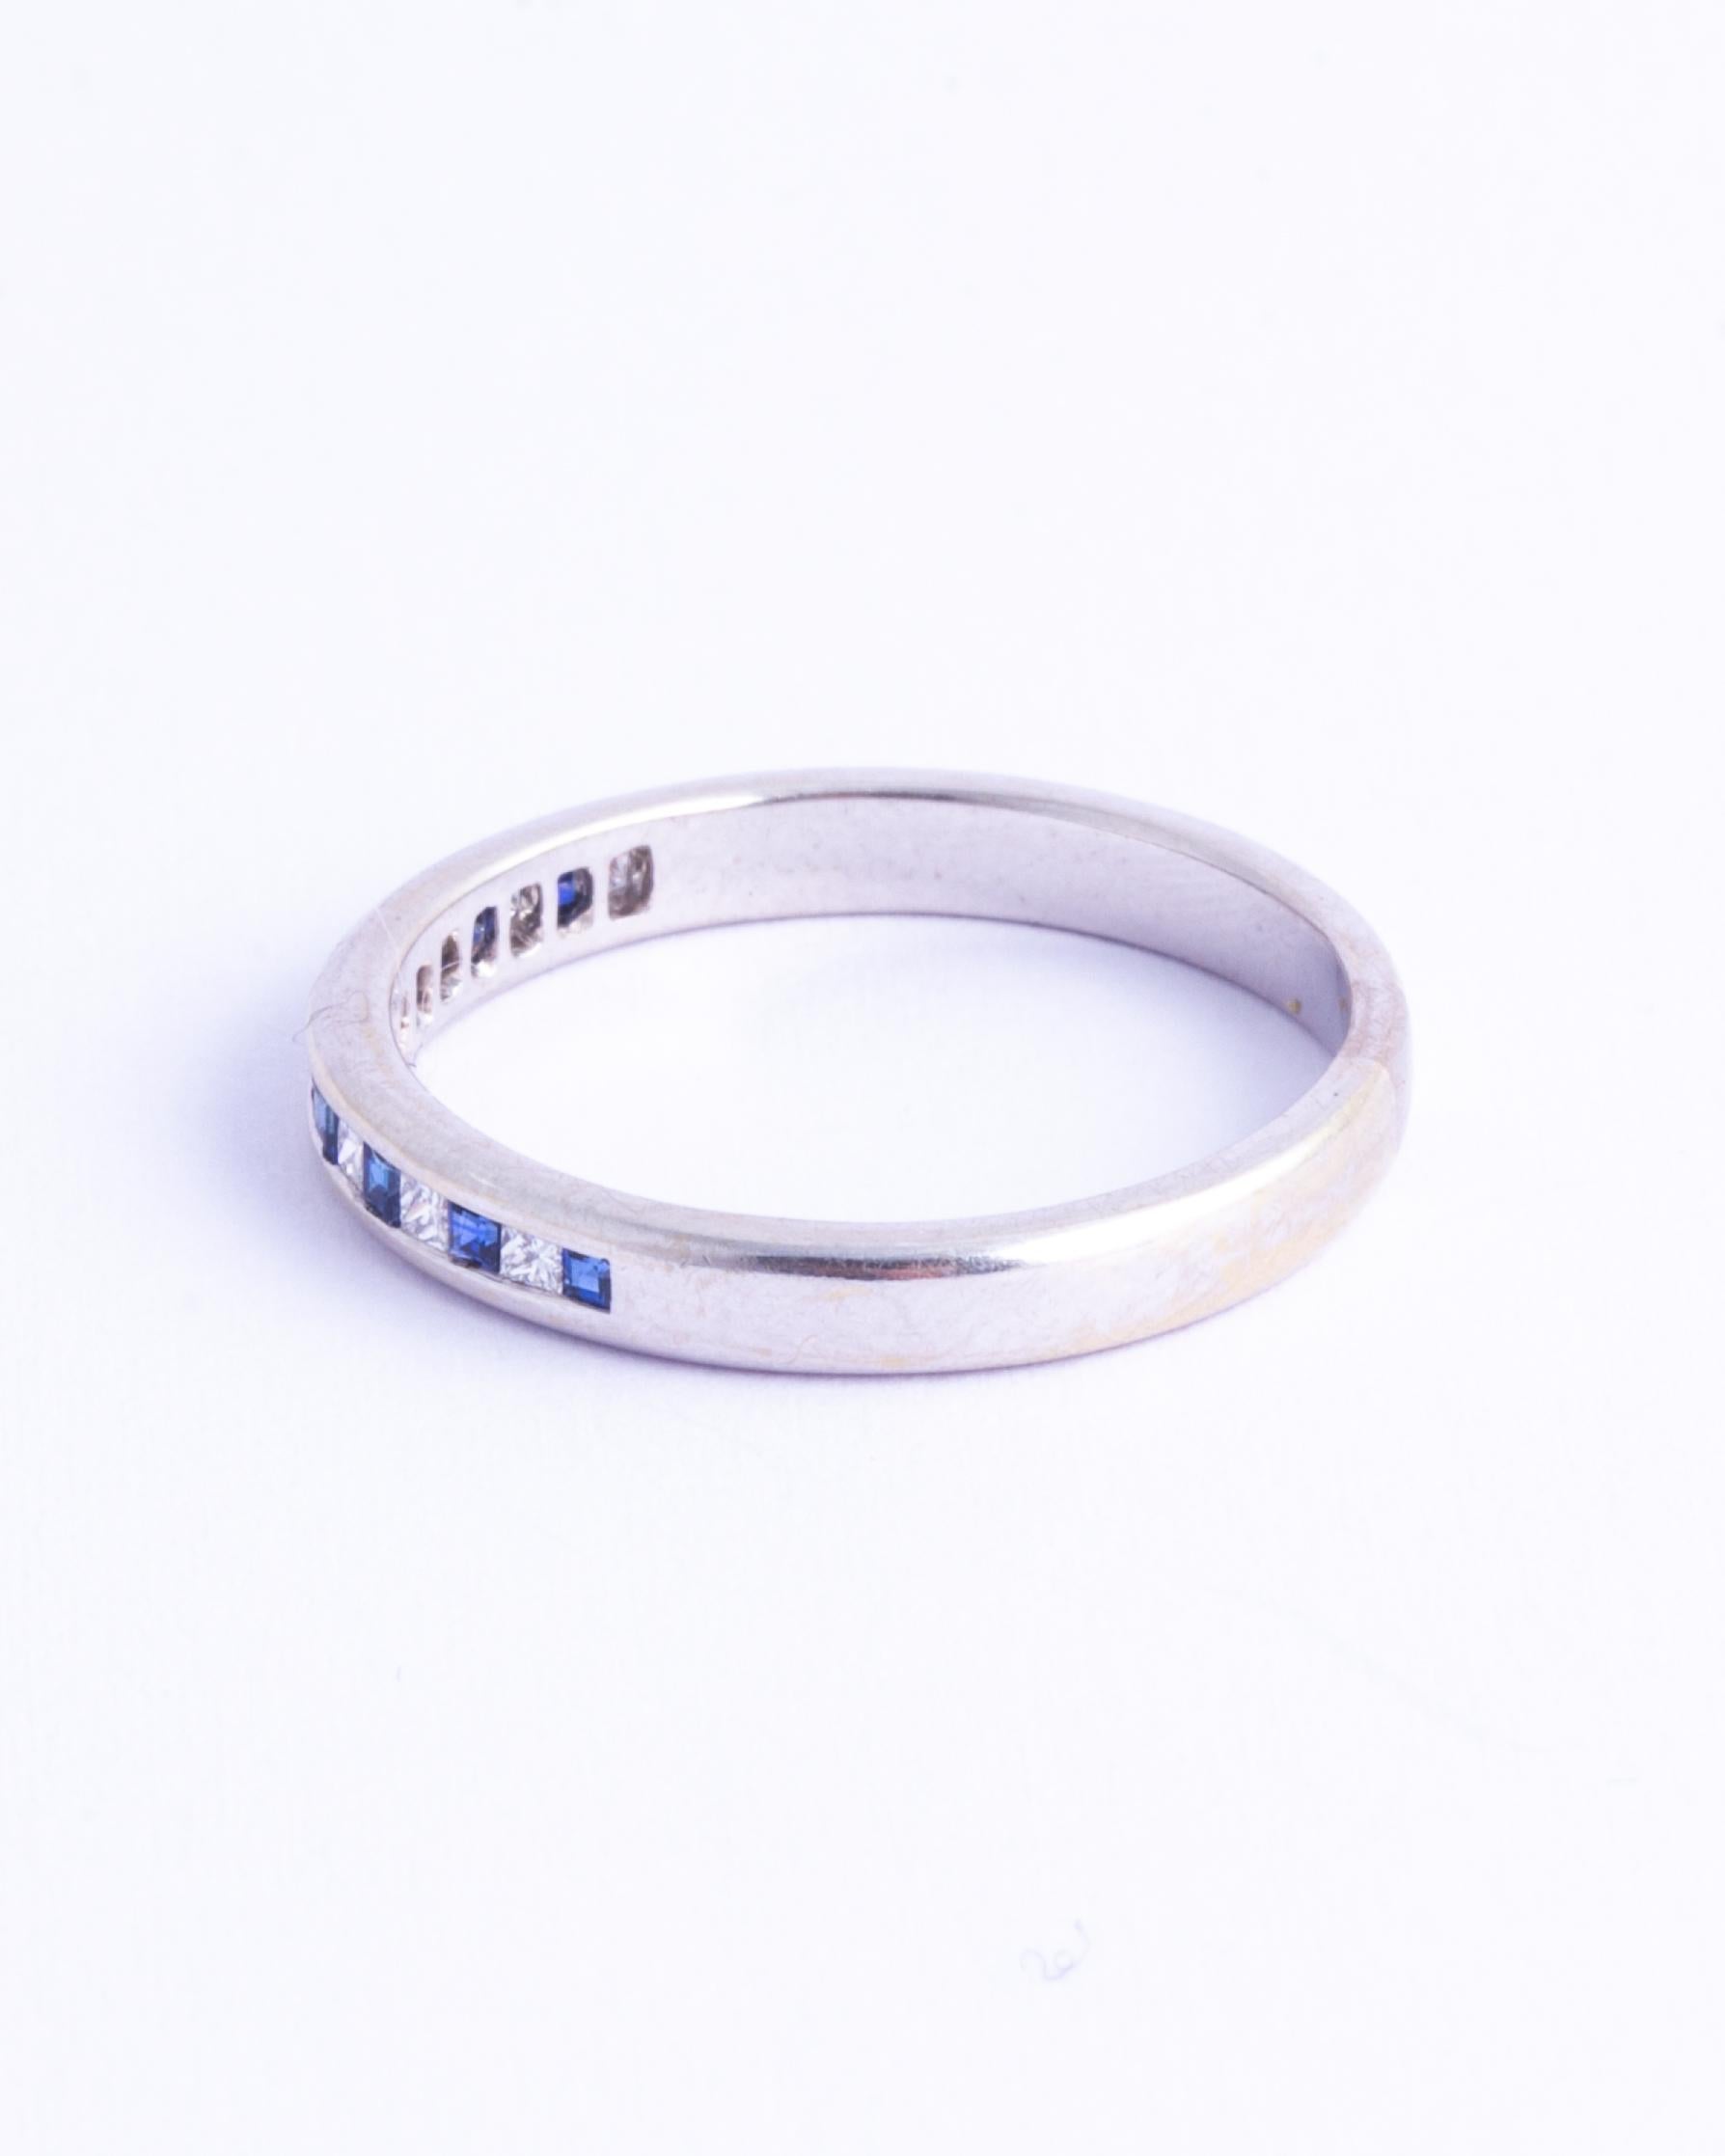 The gorgeous square cut stones set within the 18ct white gold are so sparkly and the sapphires are a great bright blue colour. The diamonds total approx 25pts and the sapphires total approx 25pts. Made in London, England. 

Ring Size: K 1/2 or 5 1/2